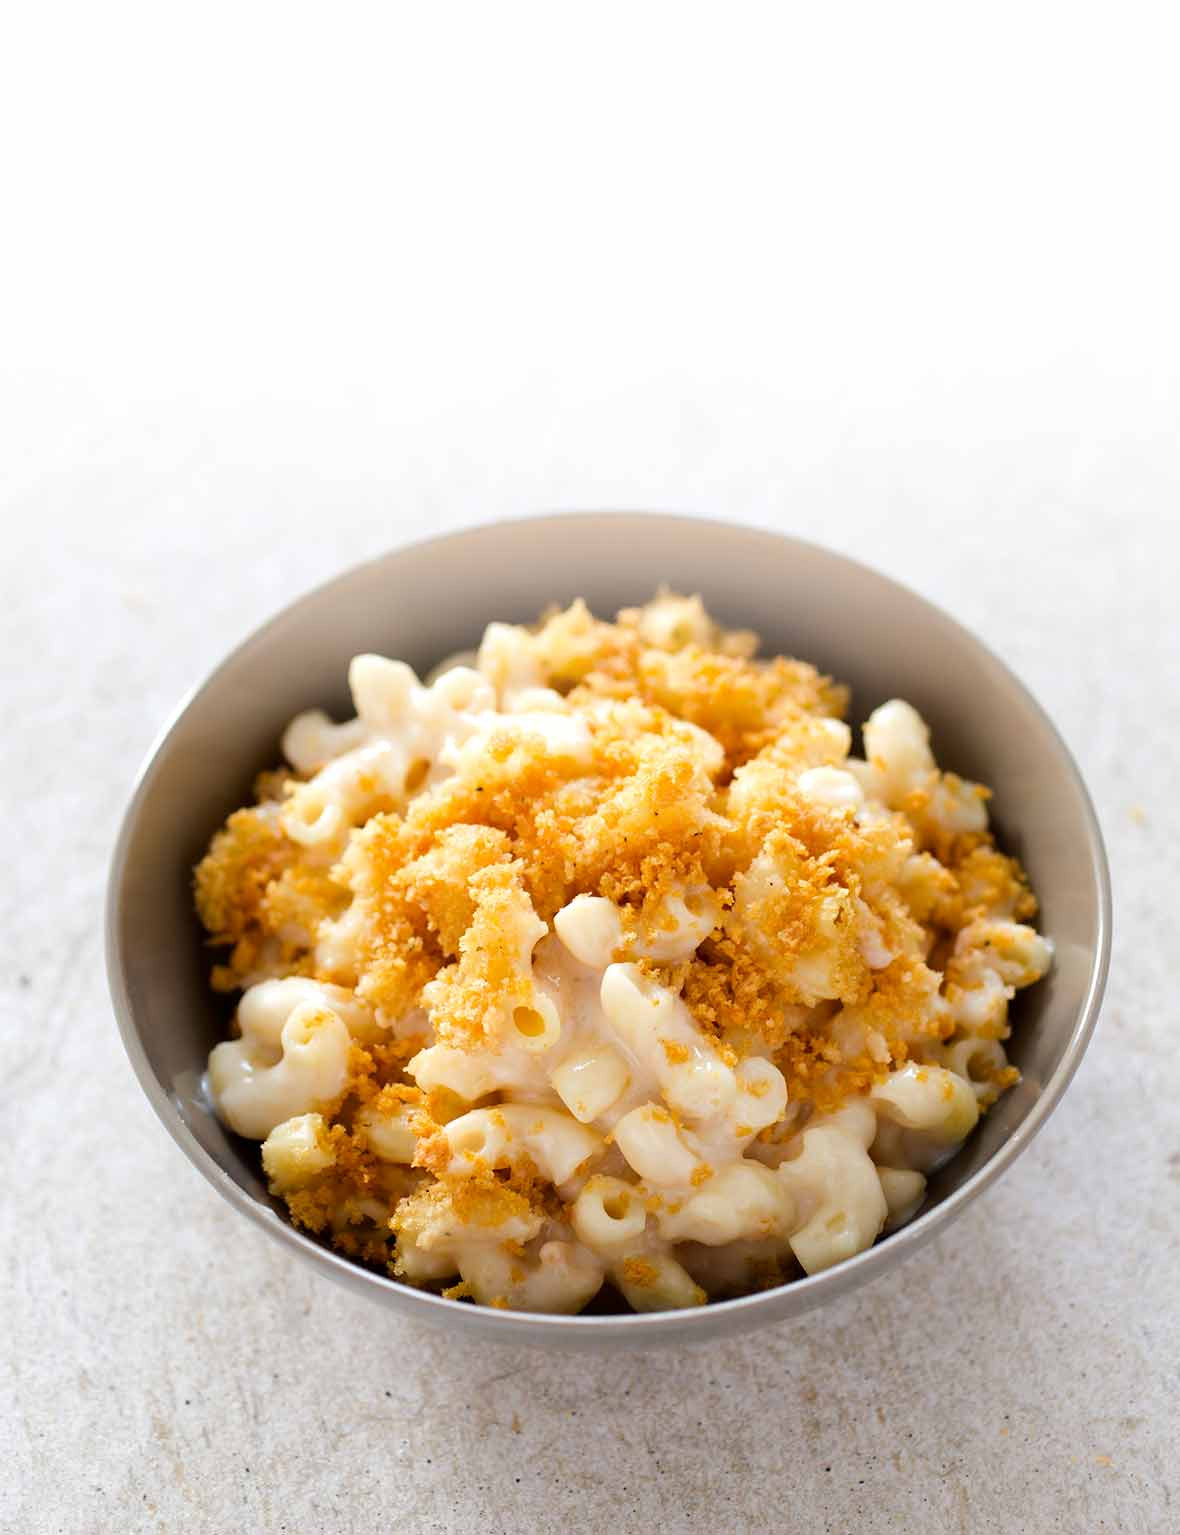 Recipes For Baked Macaroni And Cheese With Bread Crumbs
 Baked Mac and Cheese with Bread Crumbs Recipe